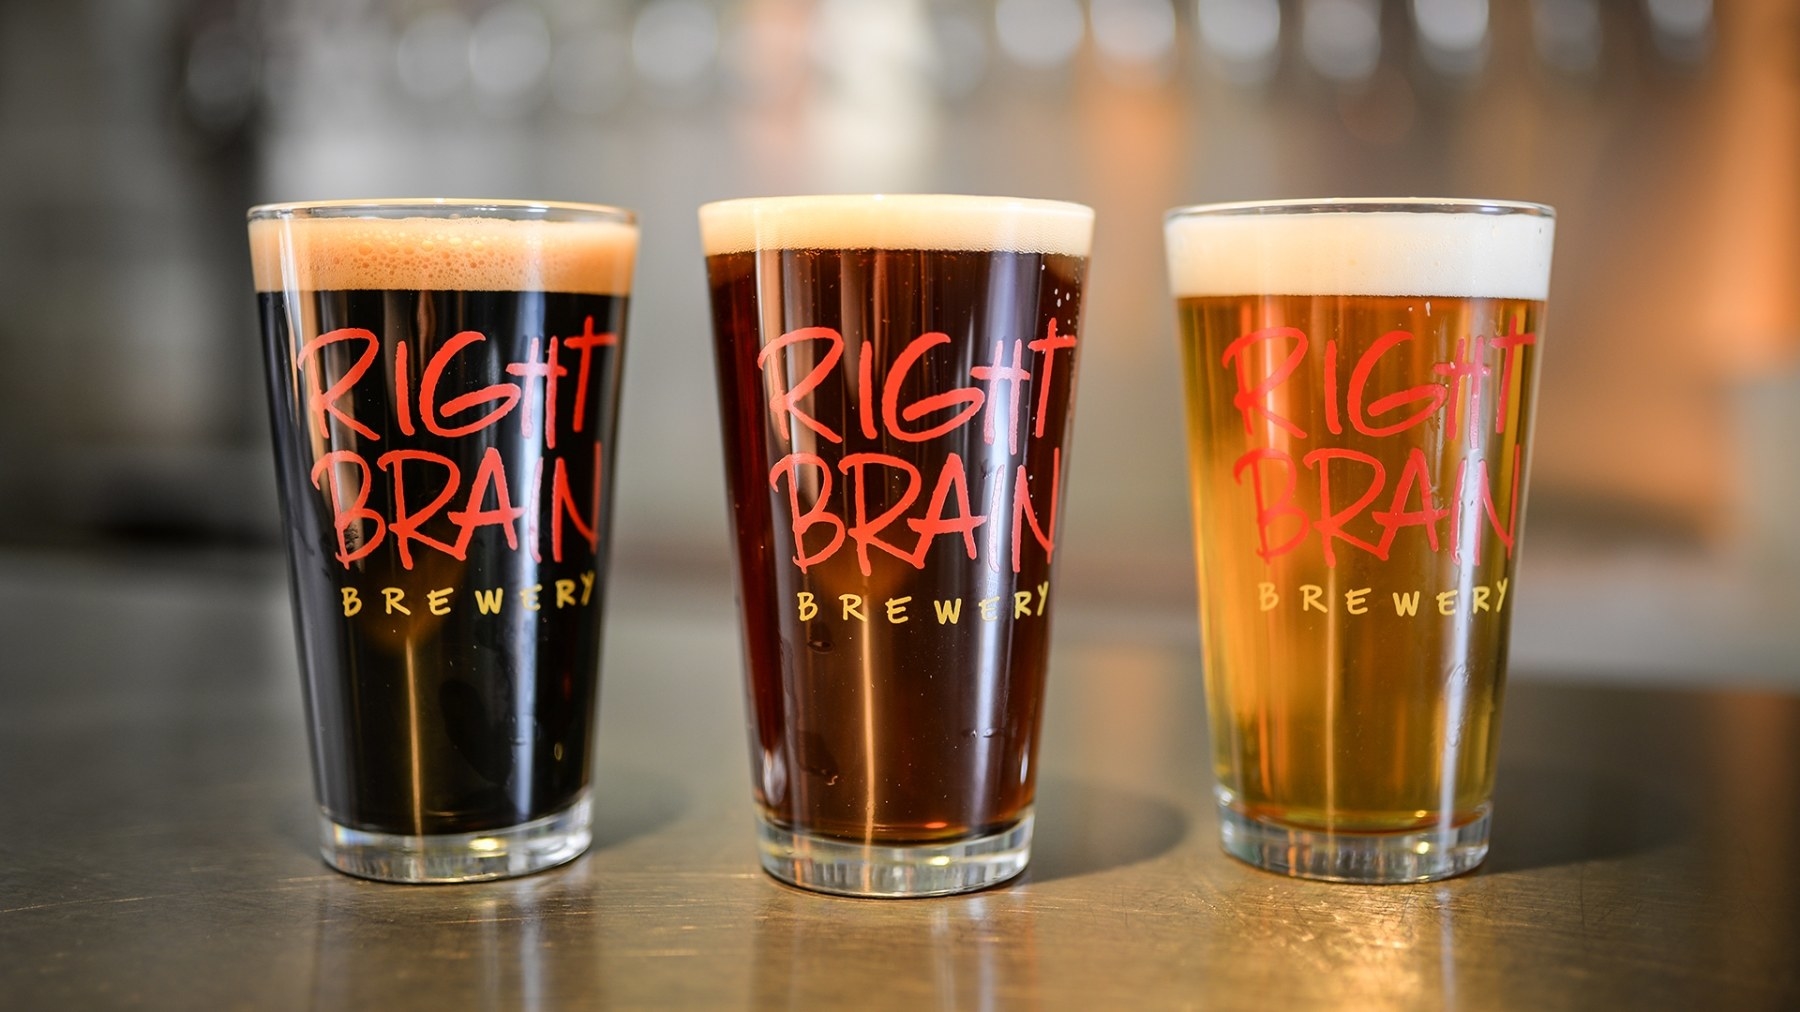 Three glasses holding differently colored beers, ranging from dark to light